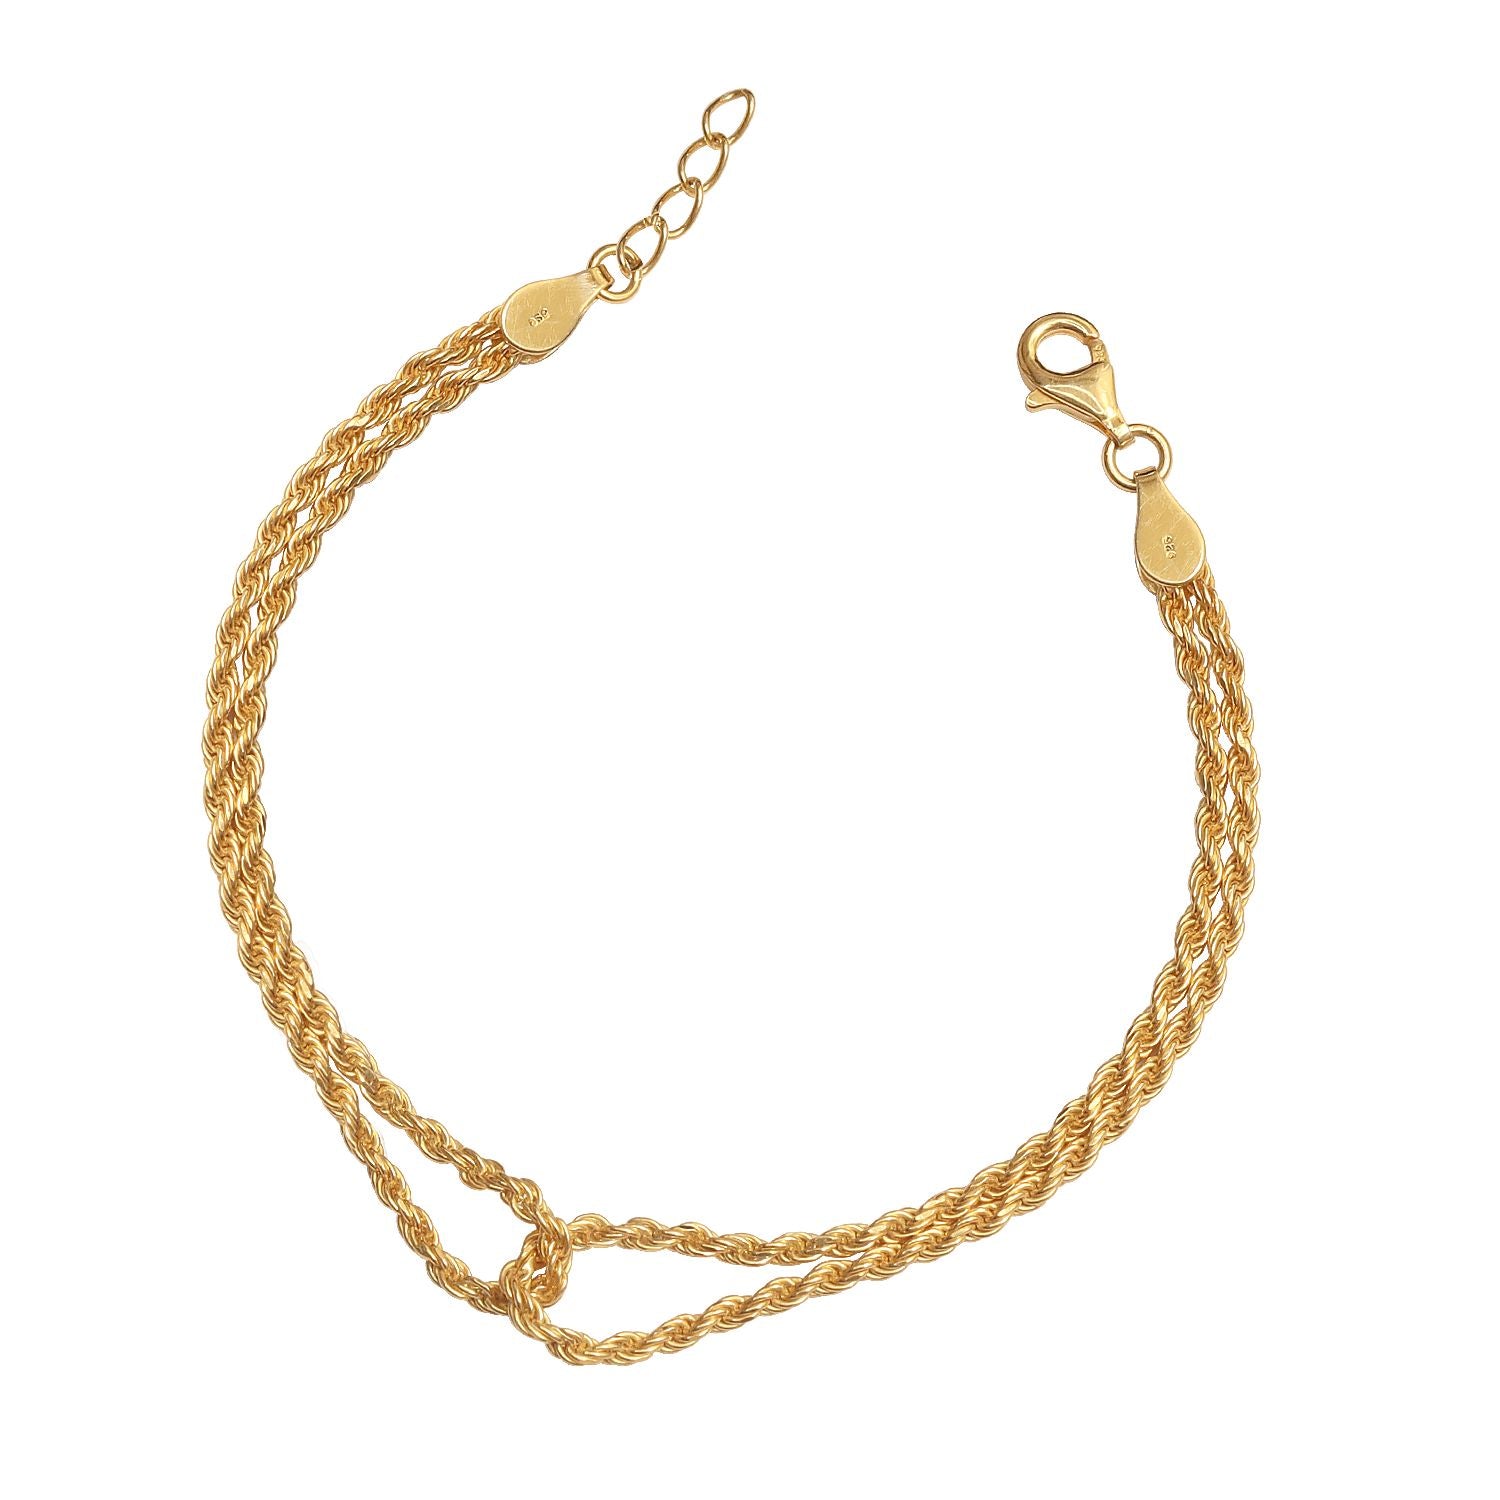 925 Sterling Silver 14K Gold Plated Layered Italian Adjustable Double Rope Chain Bracelet for Women